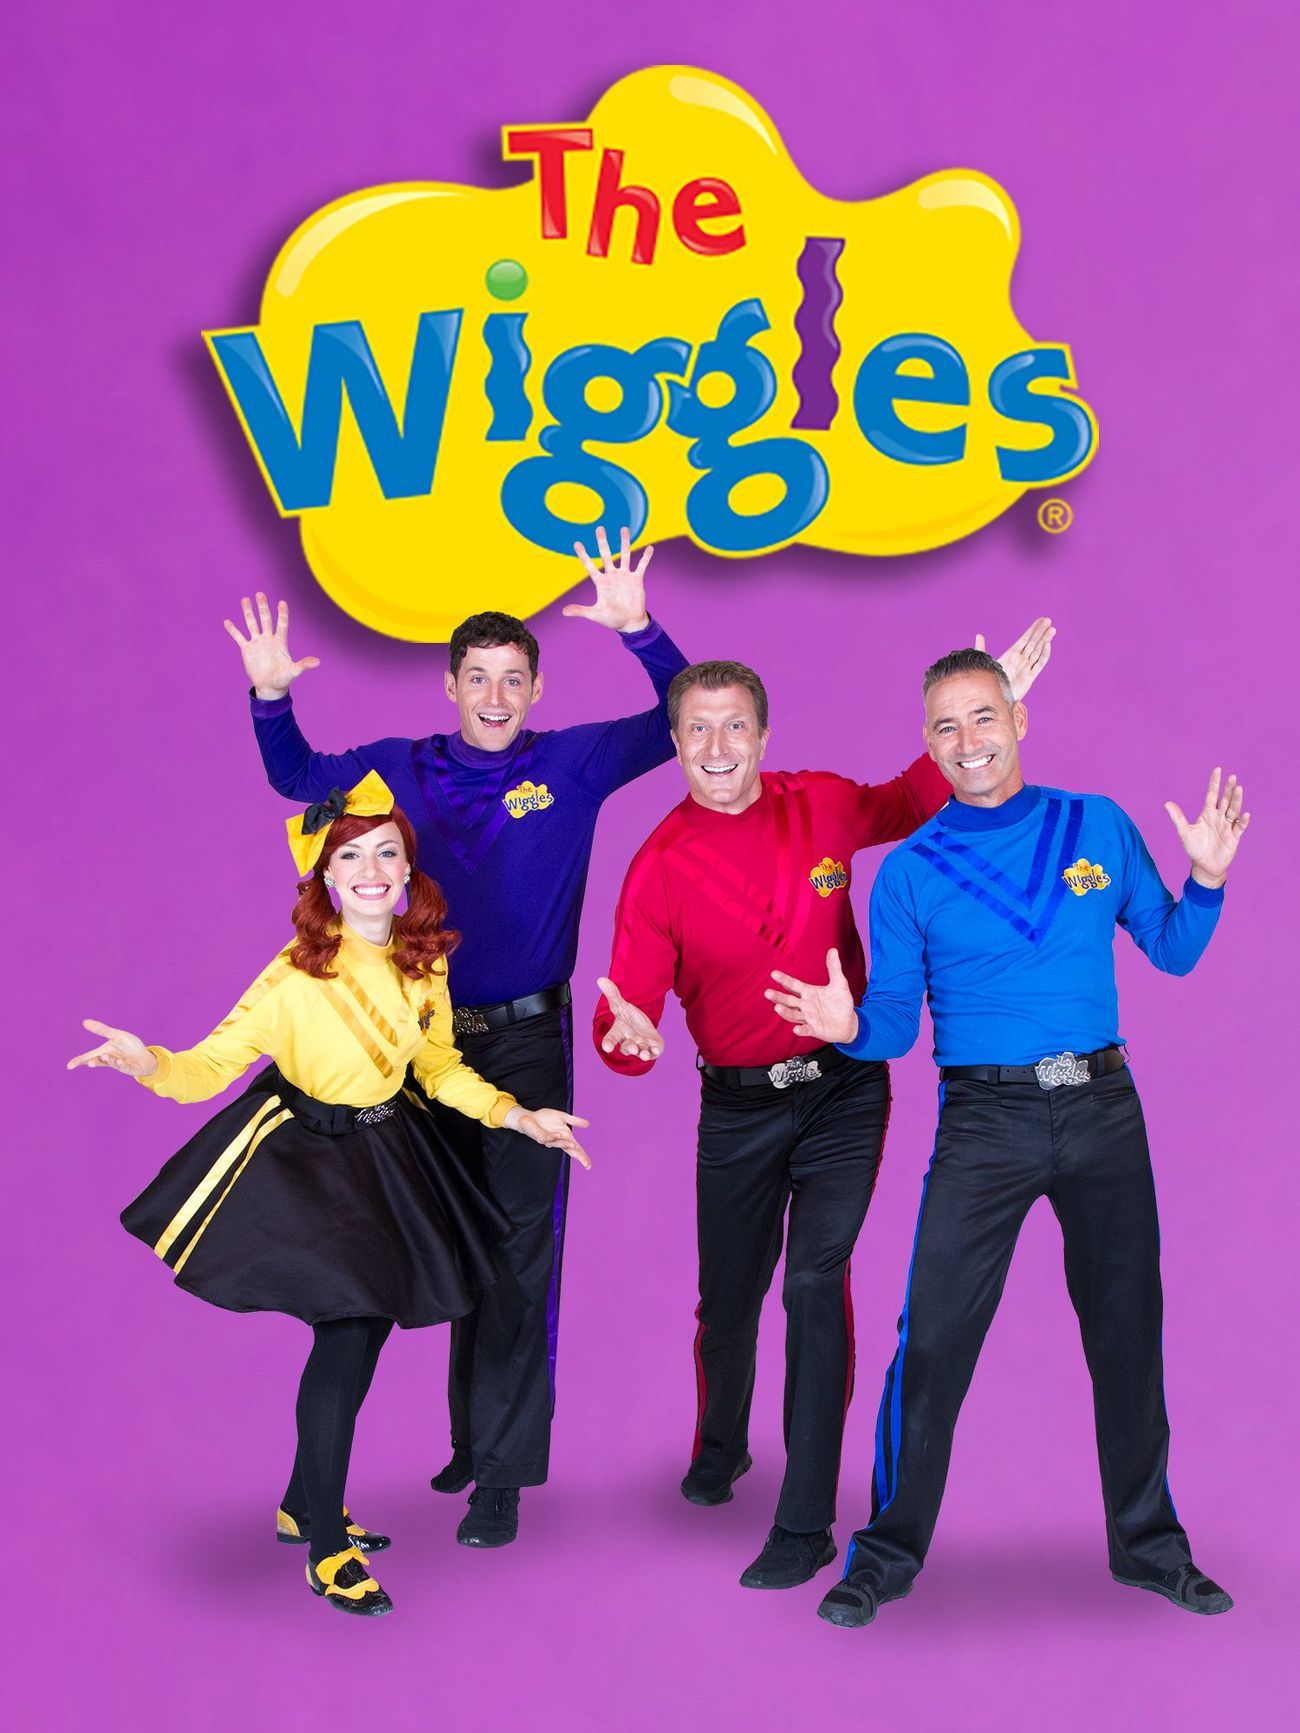 The Wiggles Image #632448 TVmaze.